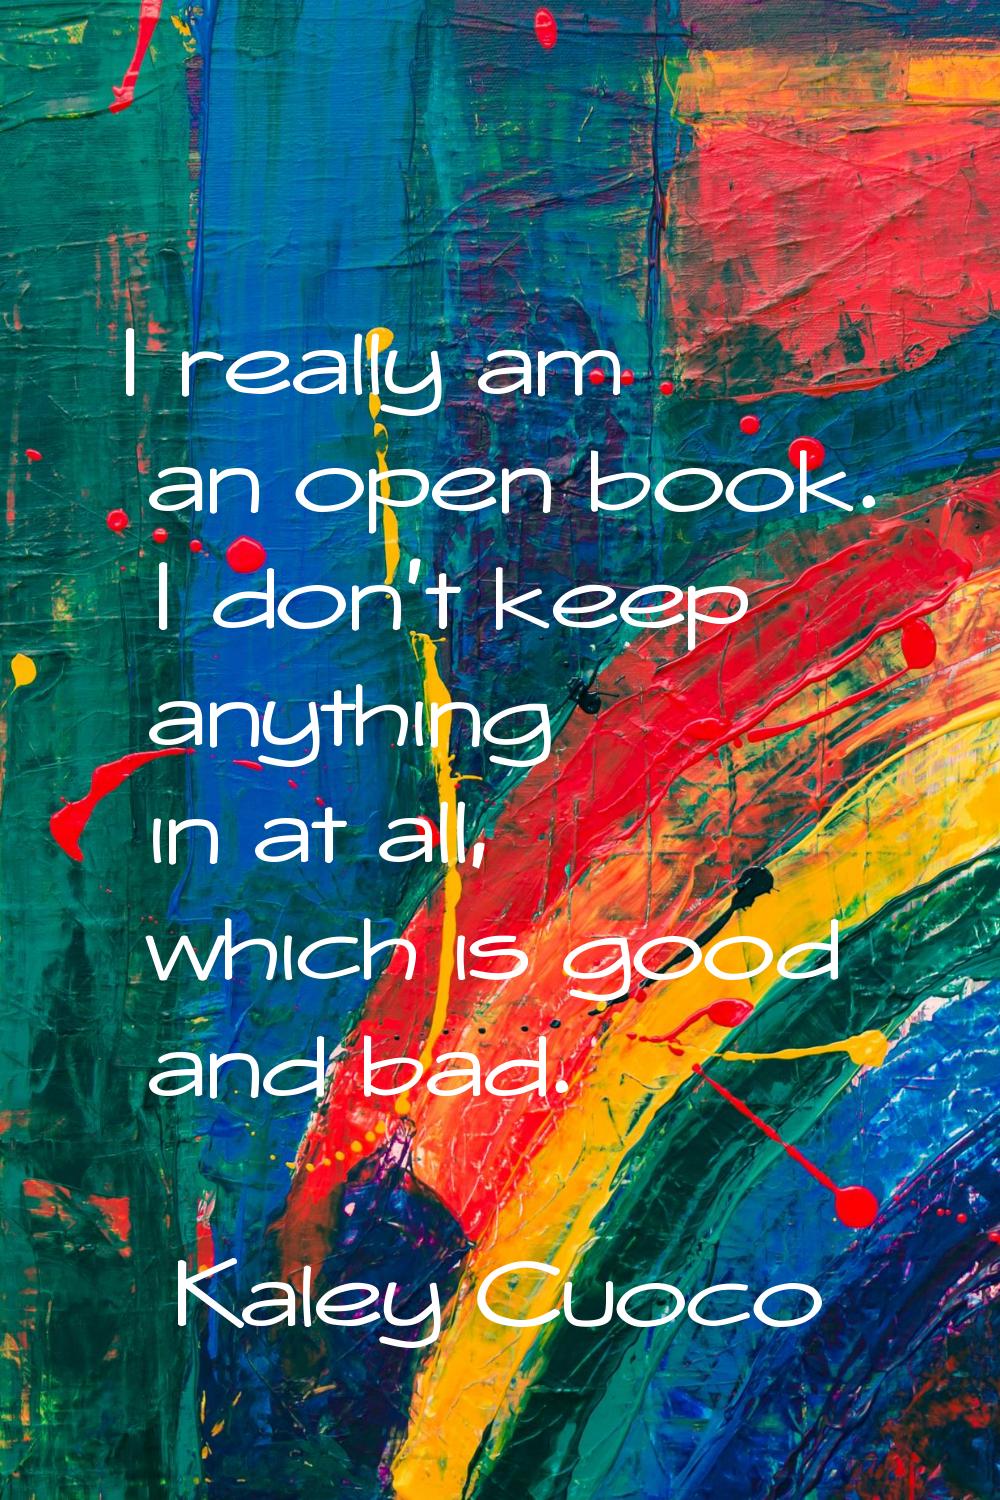 I really am an open book. I don't keep anything in at all, which is good and bad.